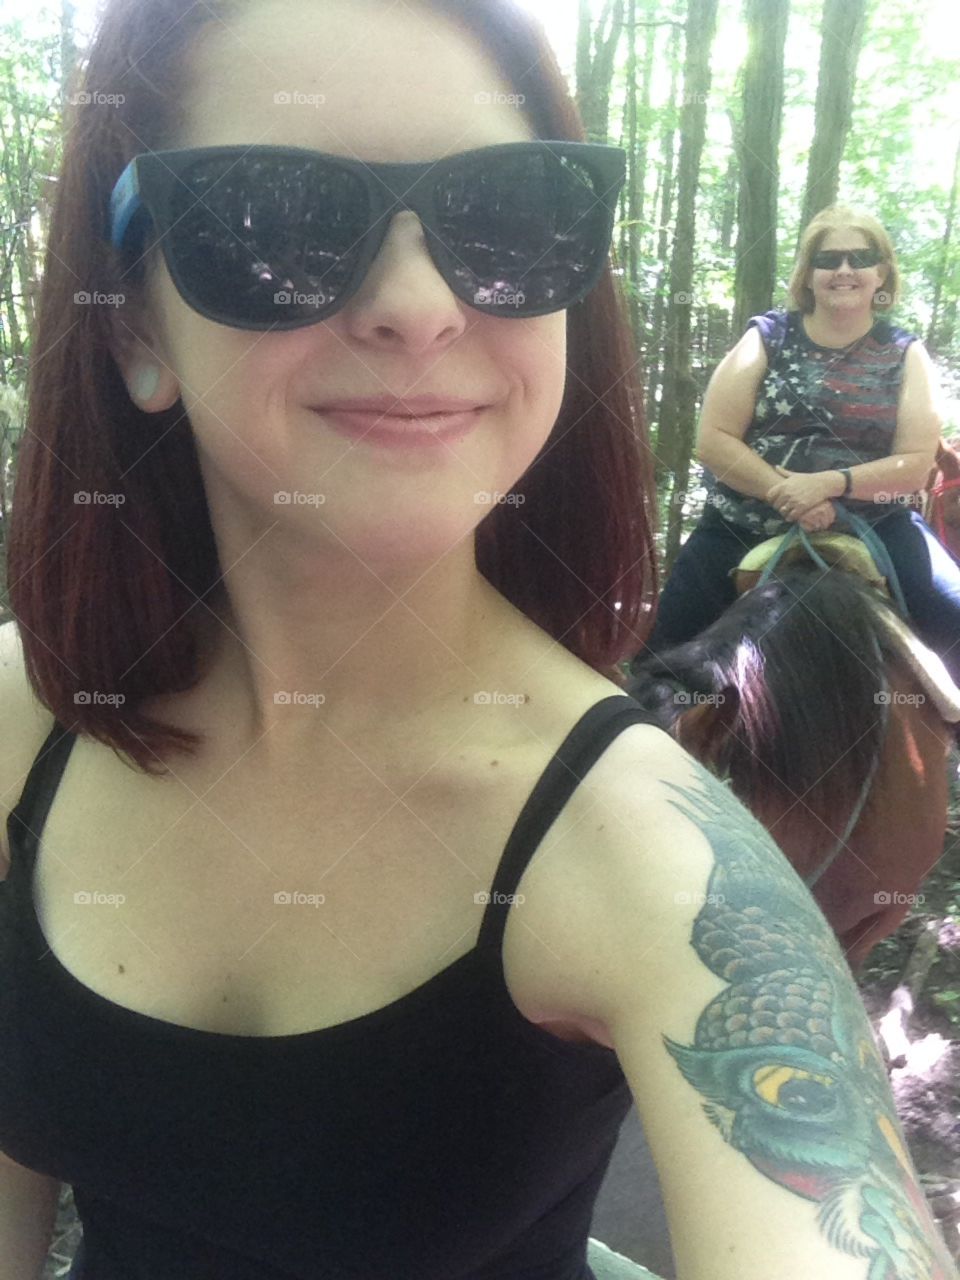 Horseback riding with the family. 